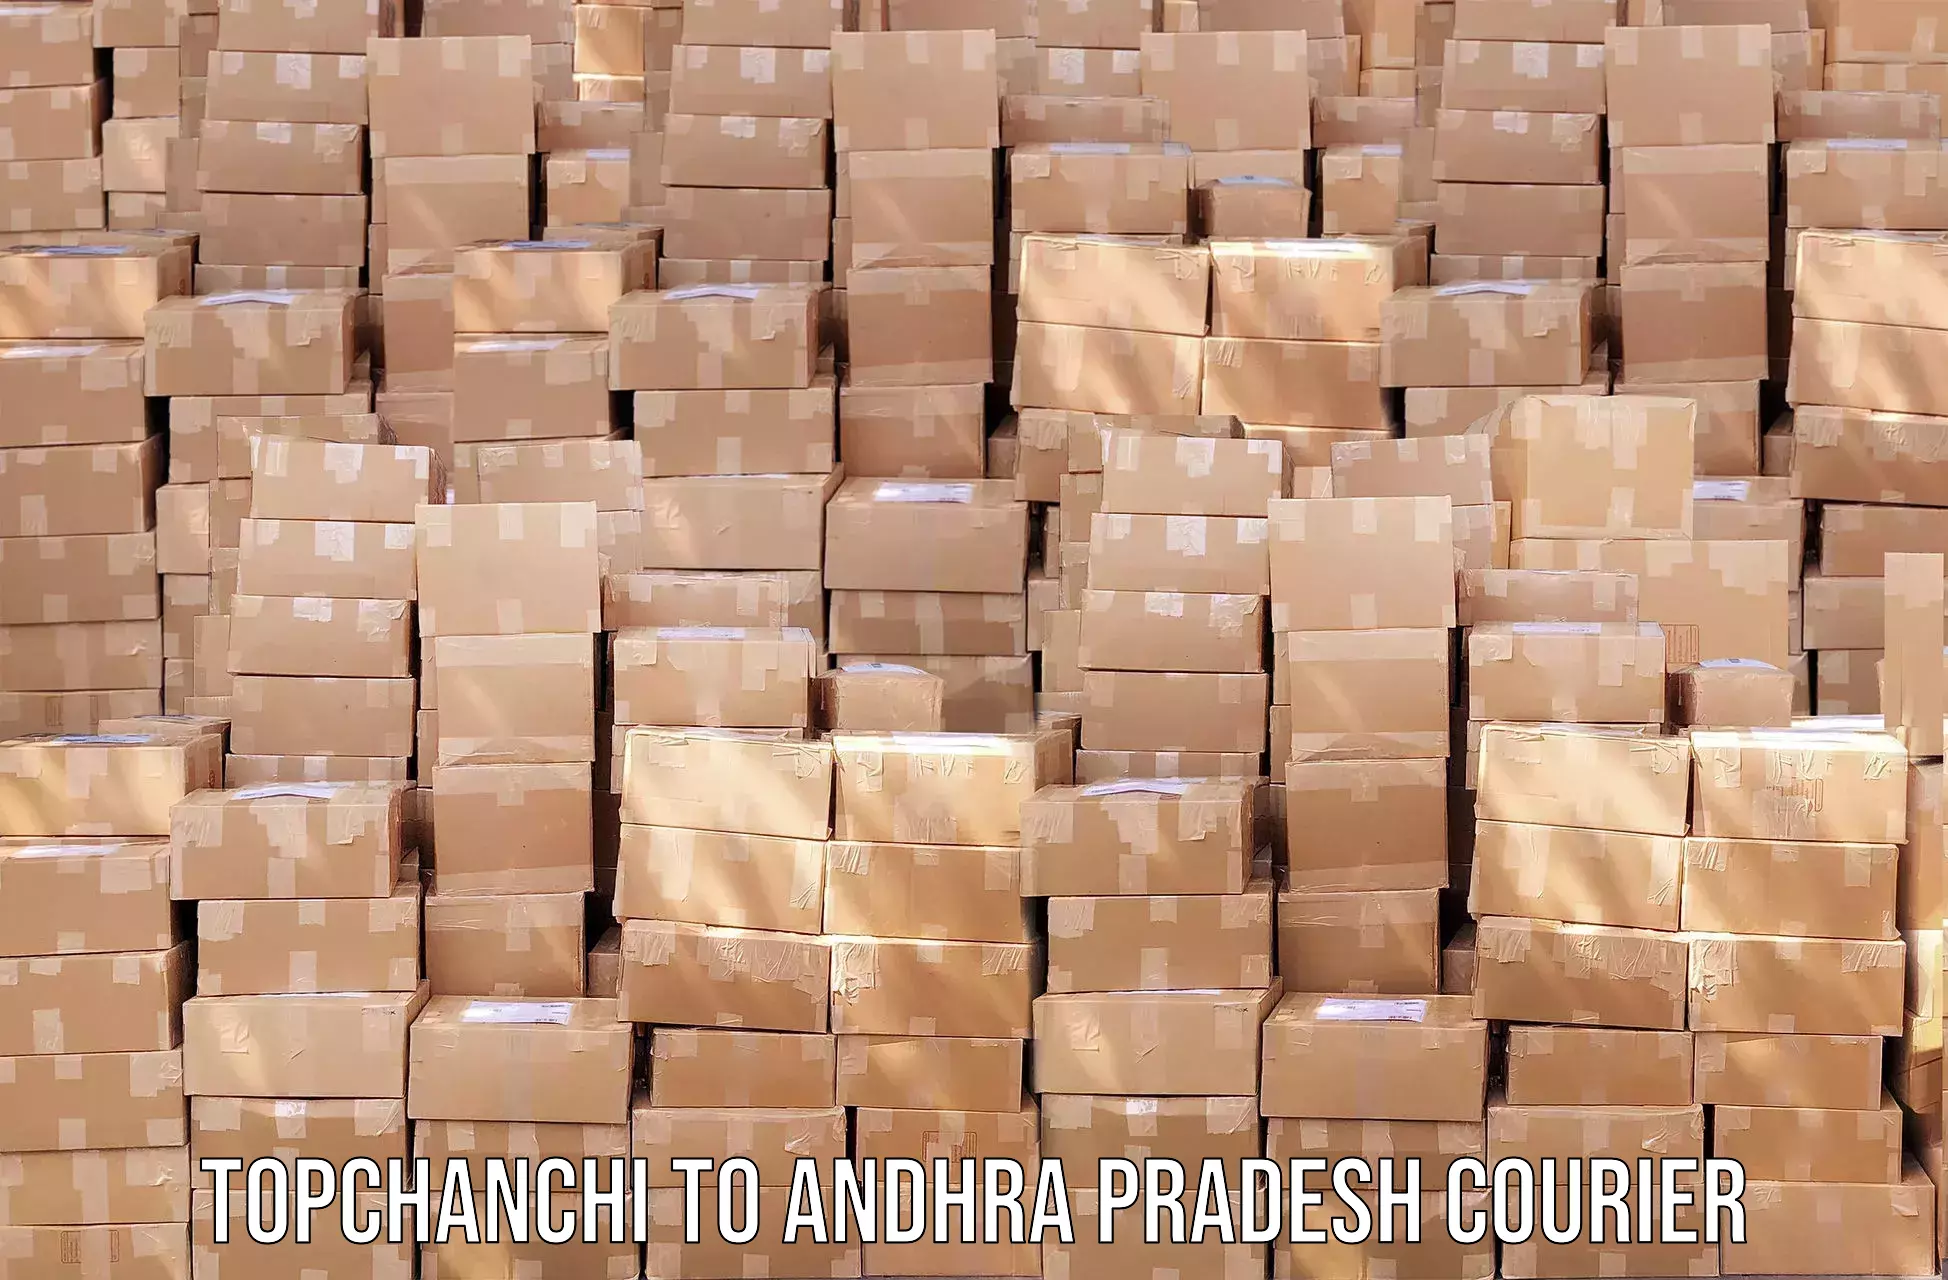 Ocean freight courier Topchanchi to Andhra Pradesh